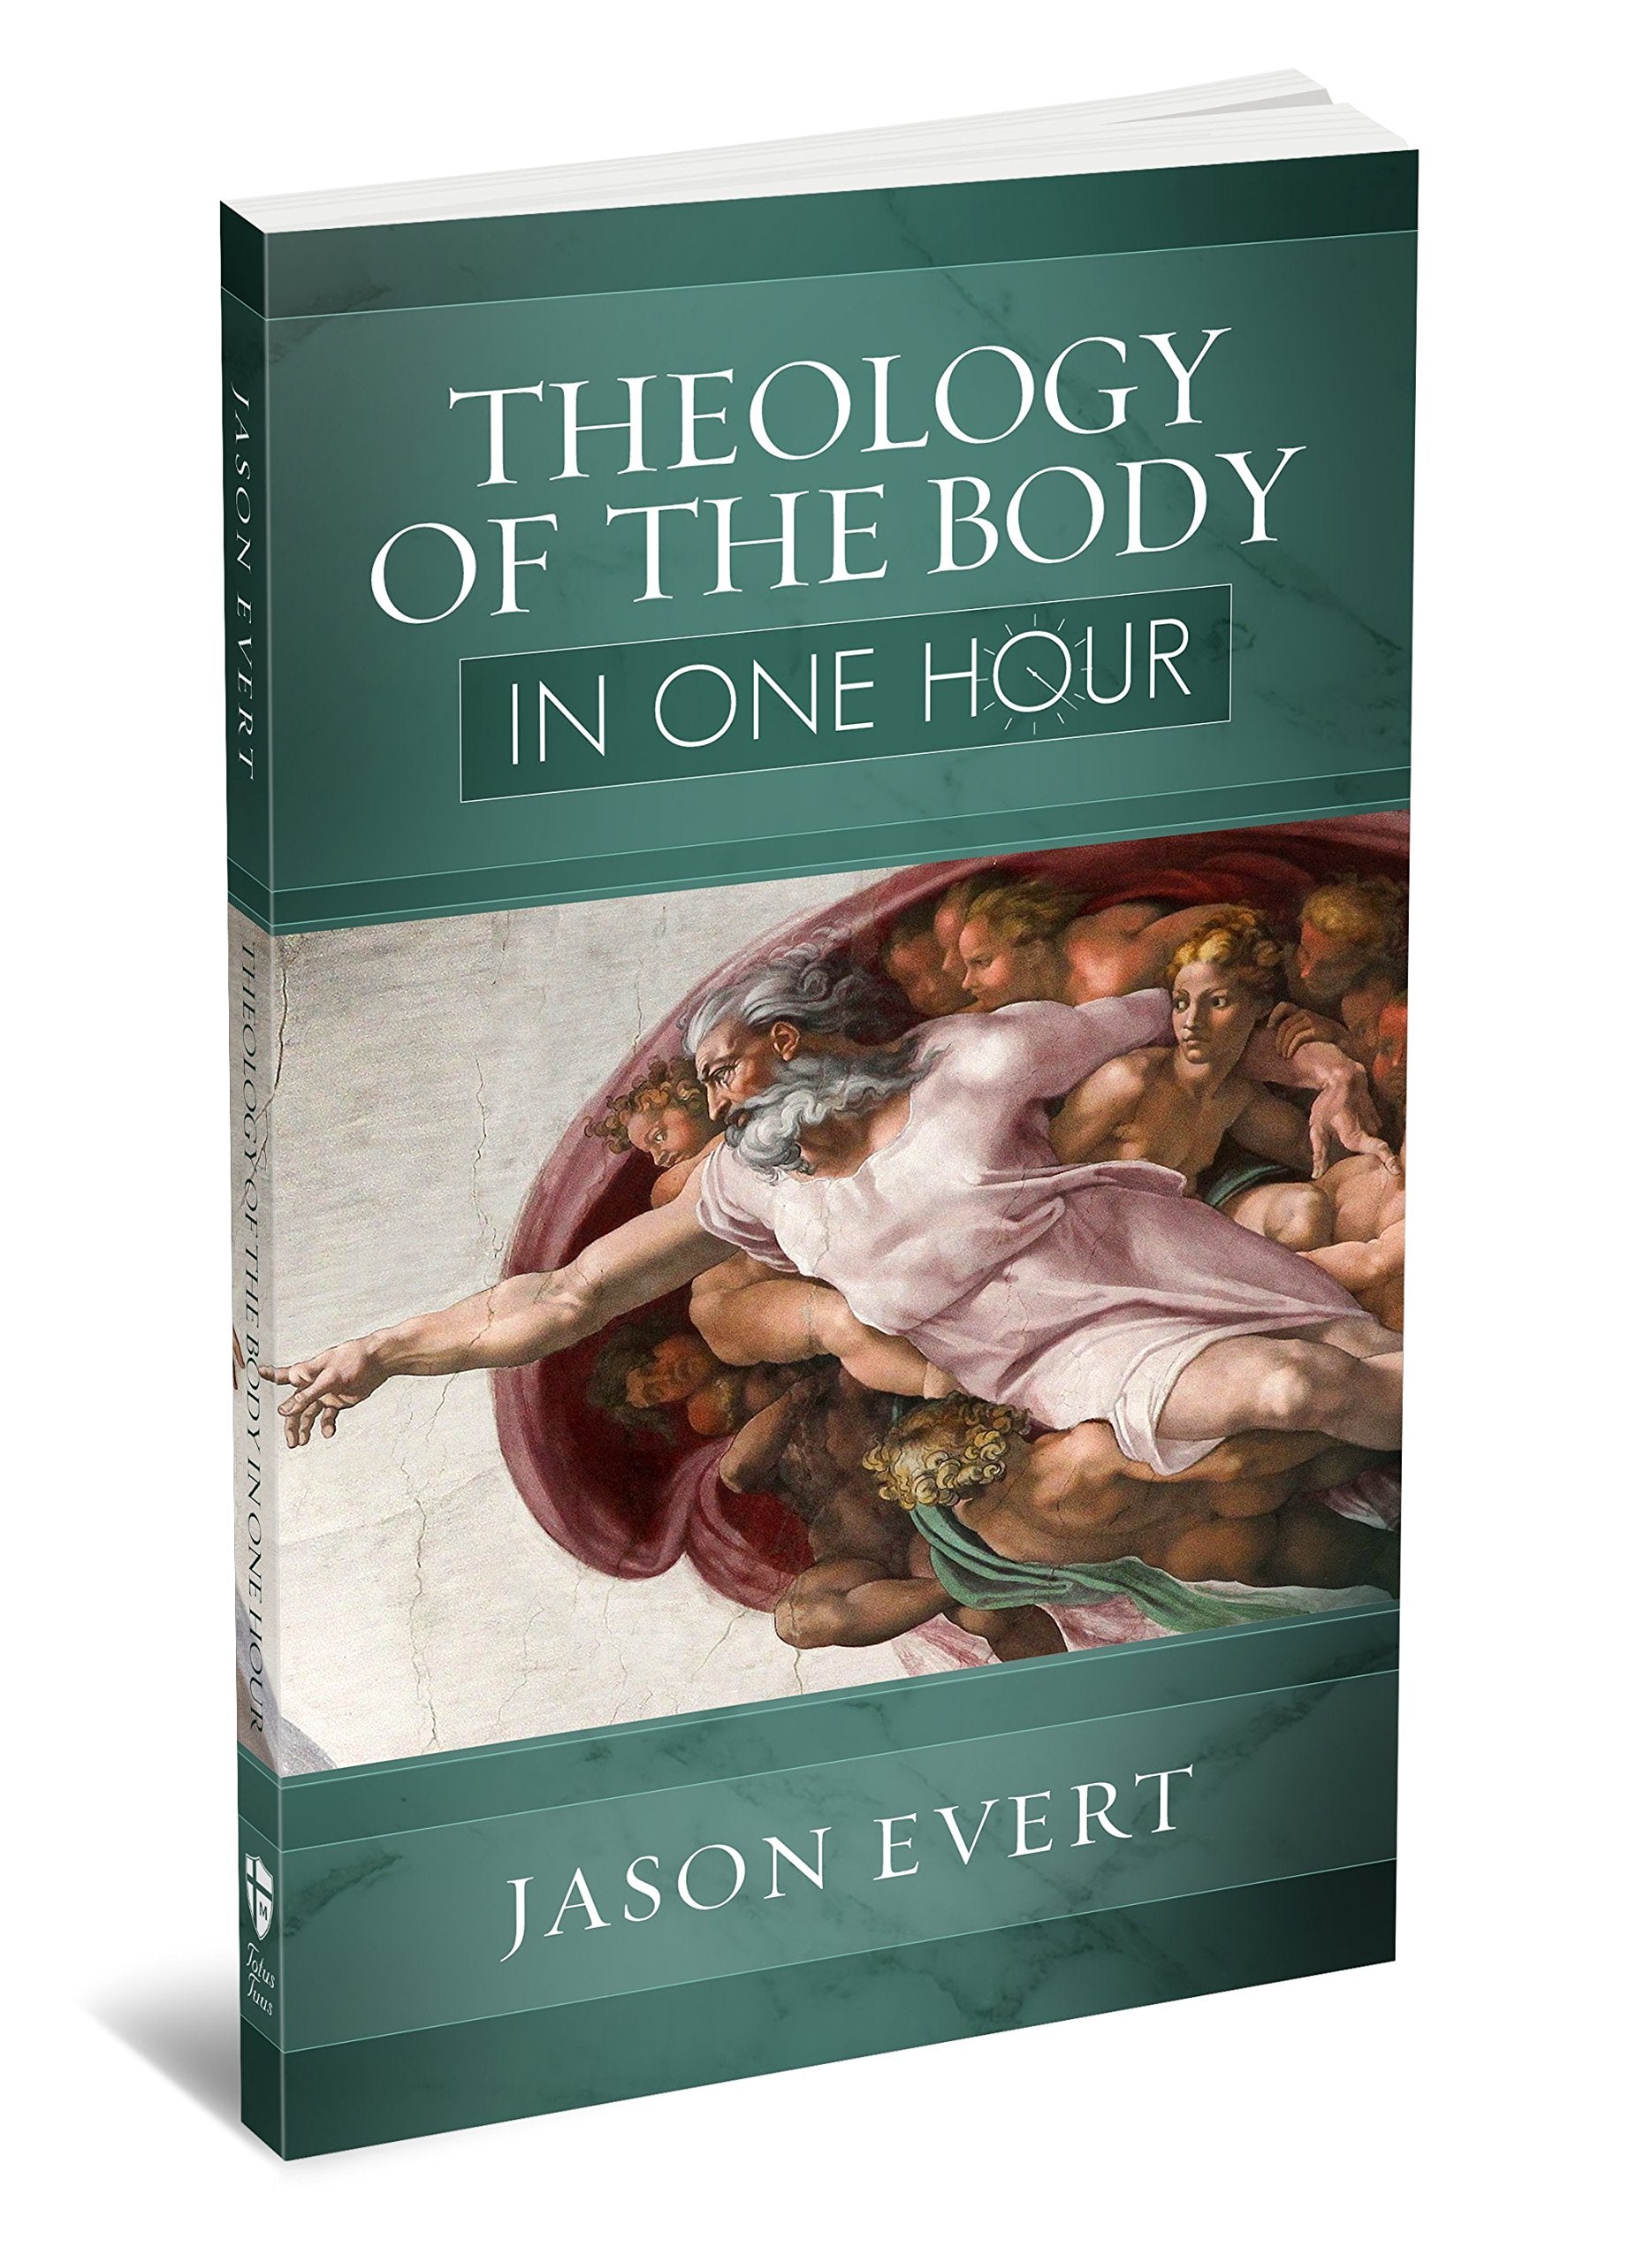 Theology of the Body in 1 hour